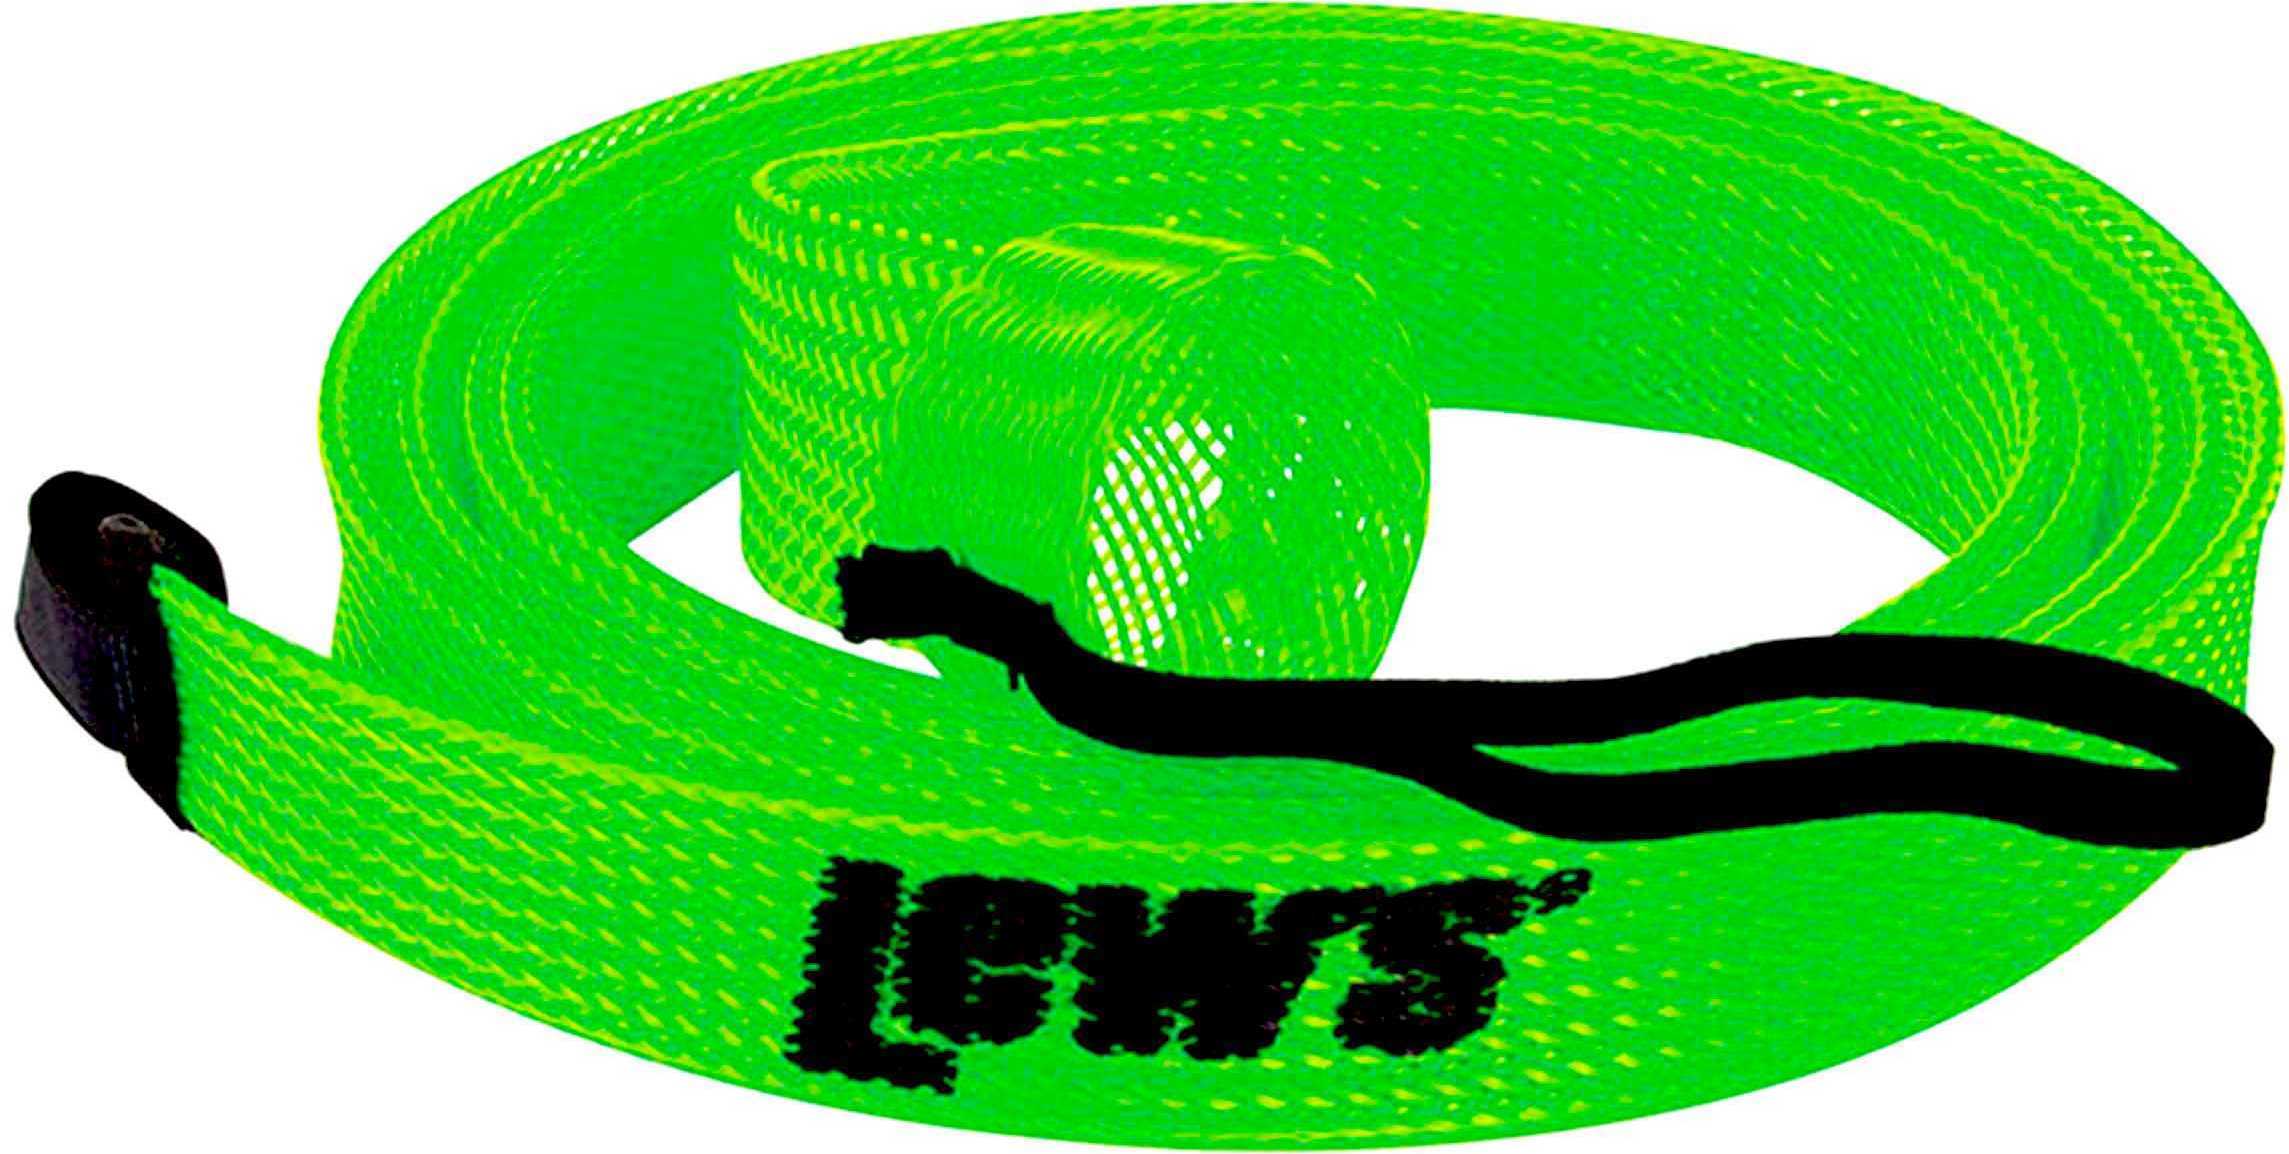 Lews Speed Sock Casting 66" - 76" Length Chartreuse Md: LSSCC1